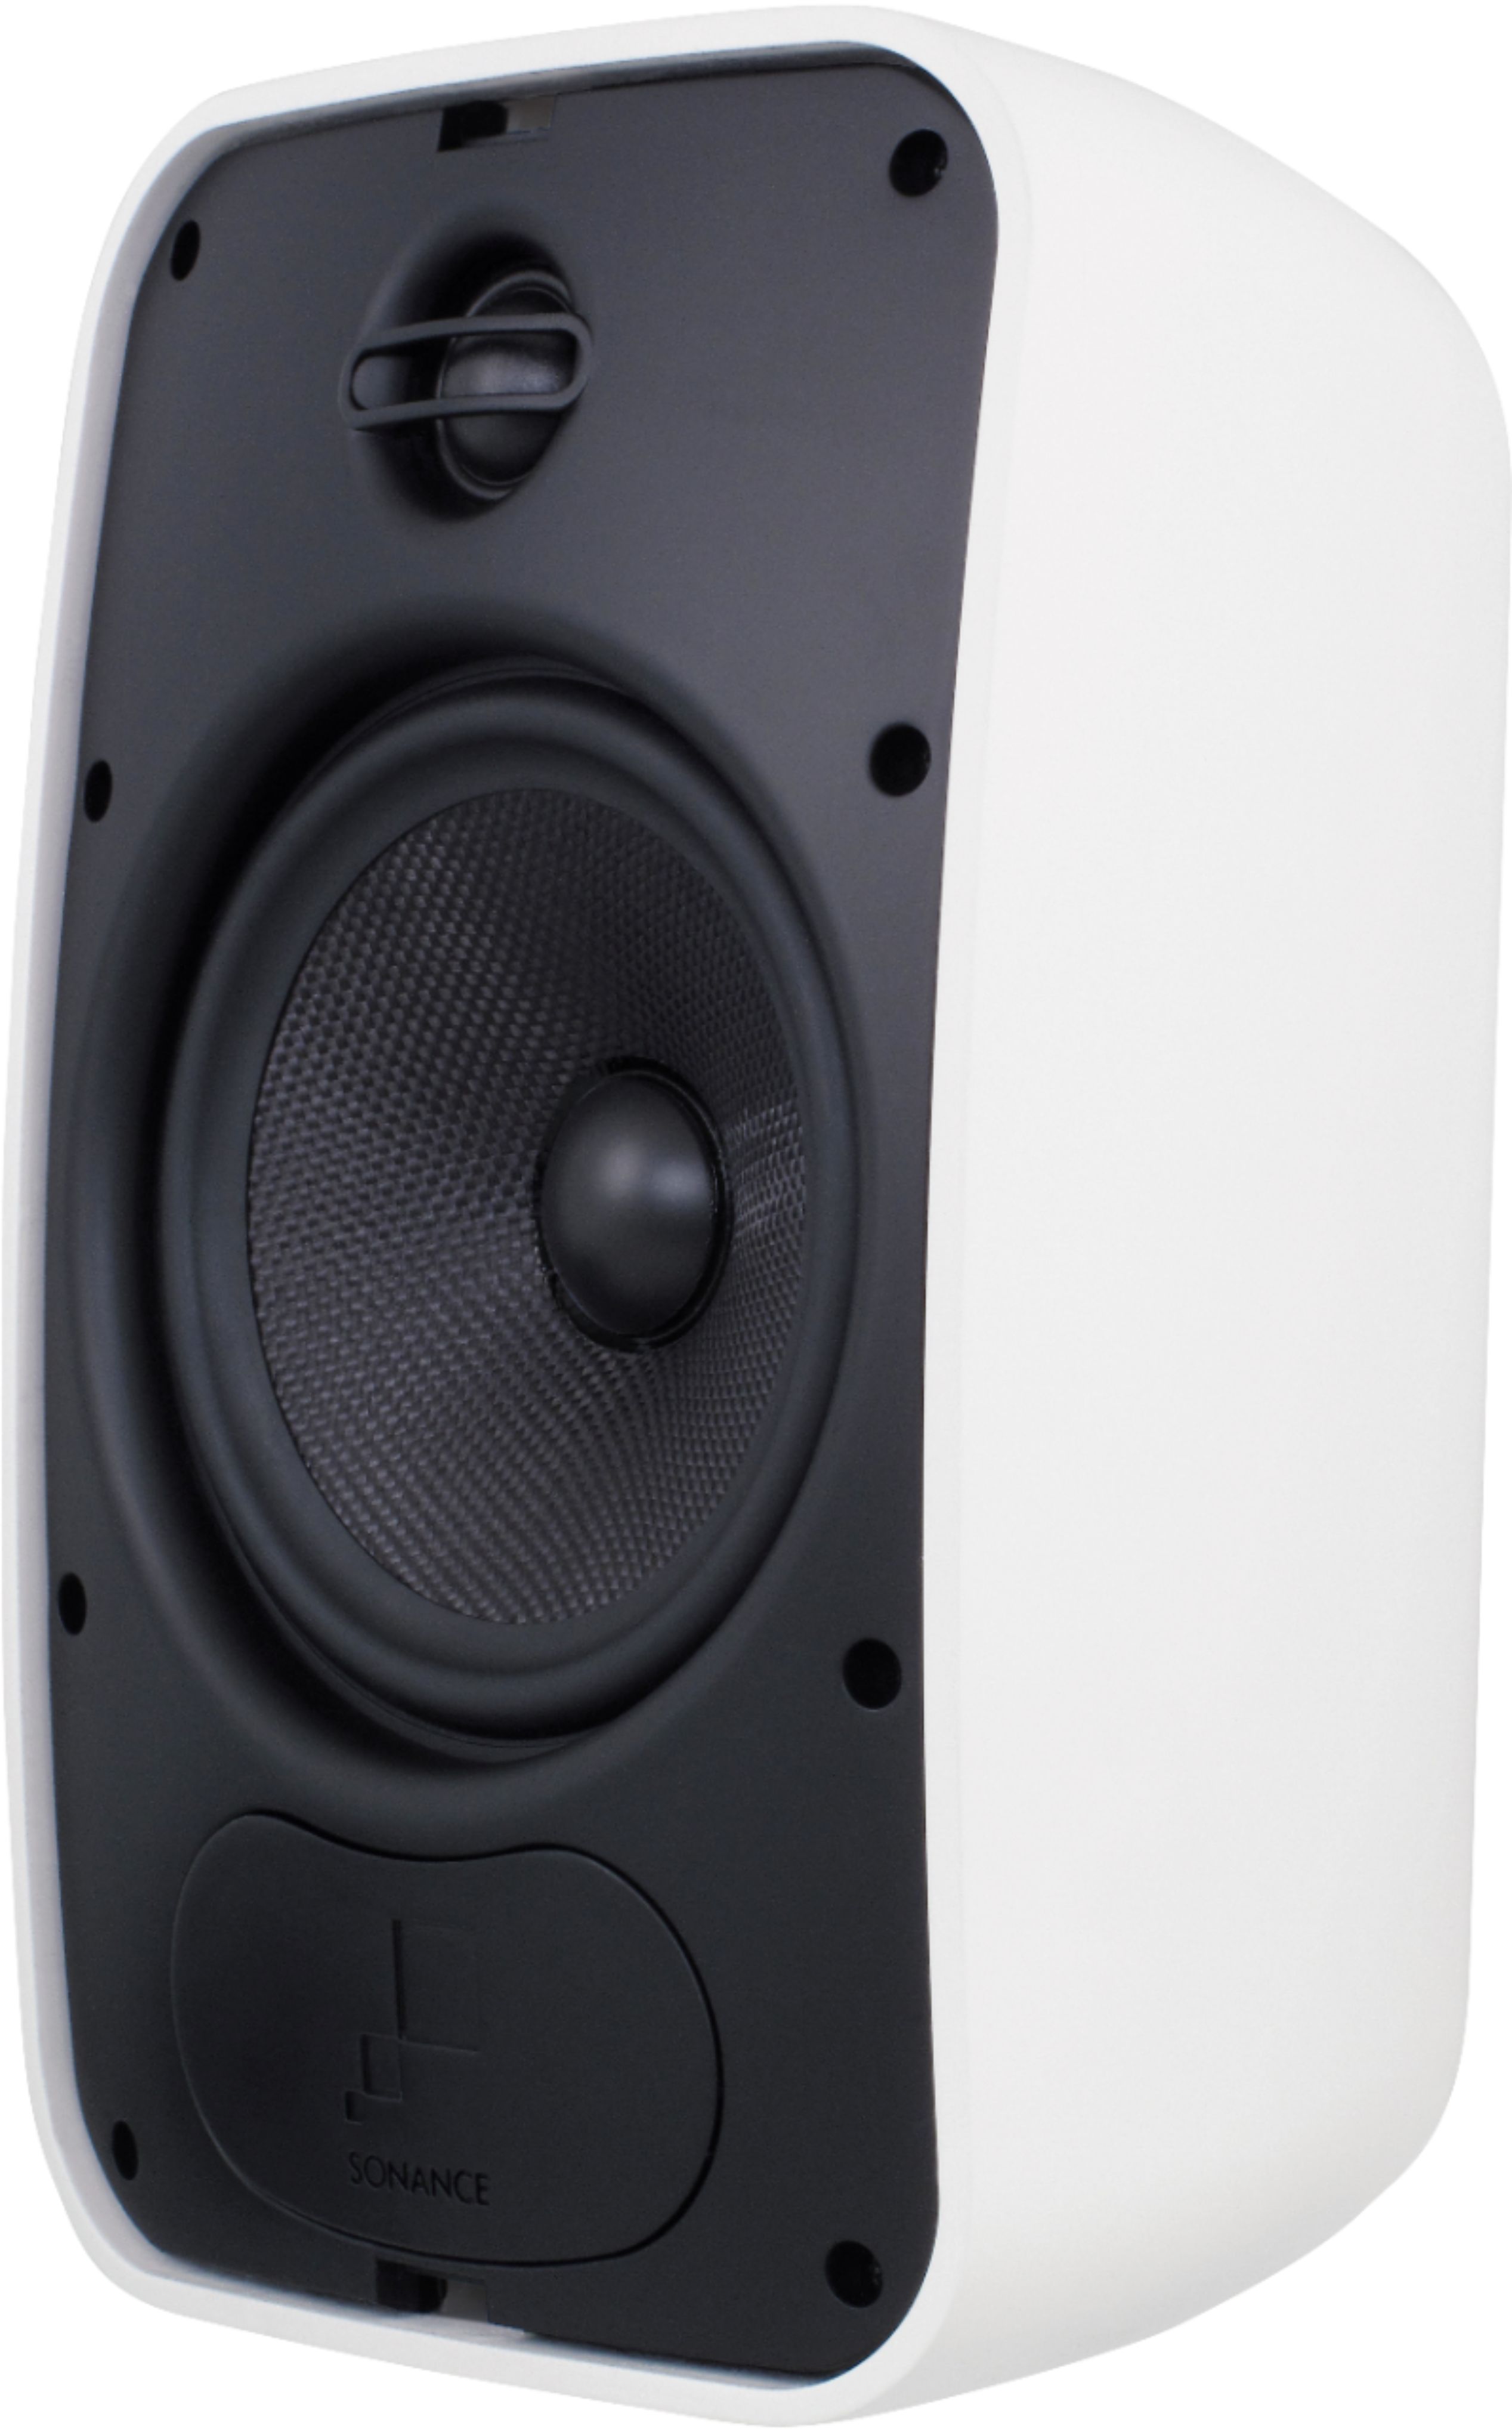 Back View: Sonance - MAGO6SYSV3 - Mag Series 2.0-Ch. Outdoor Speaker System Powered By Sonos® (Each) - Paintable White